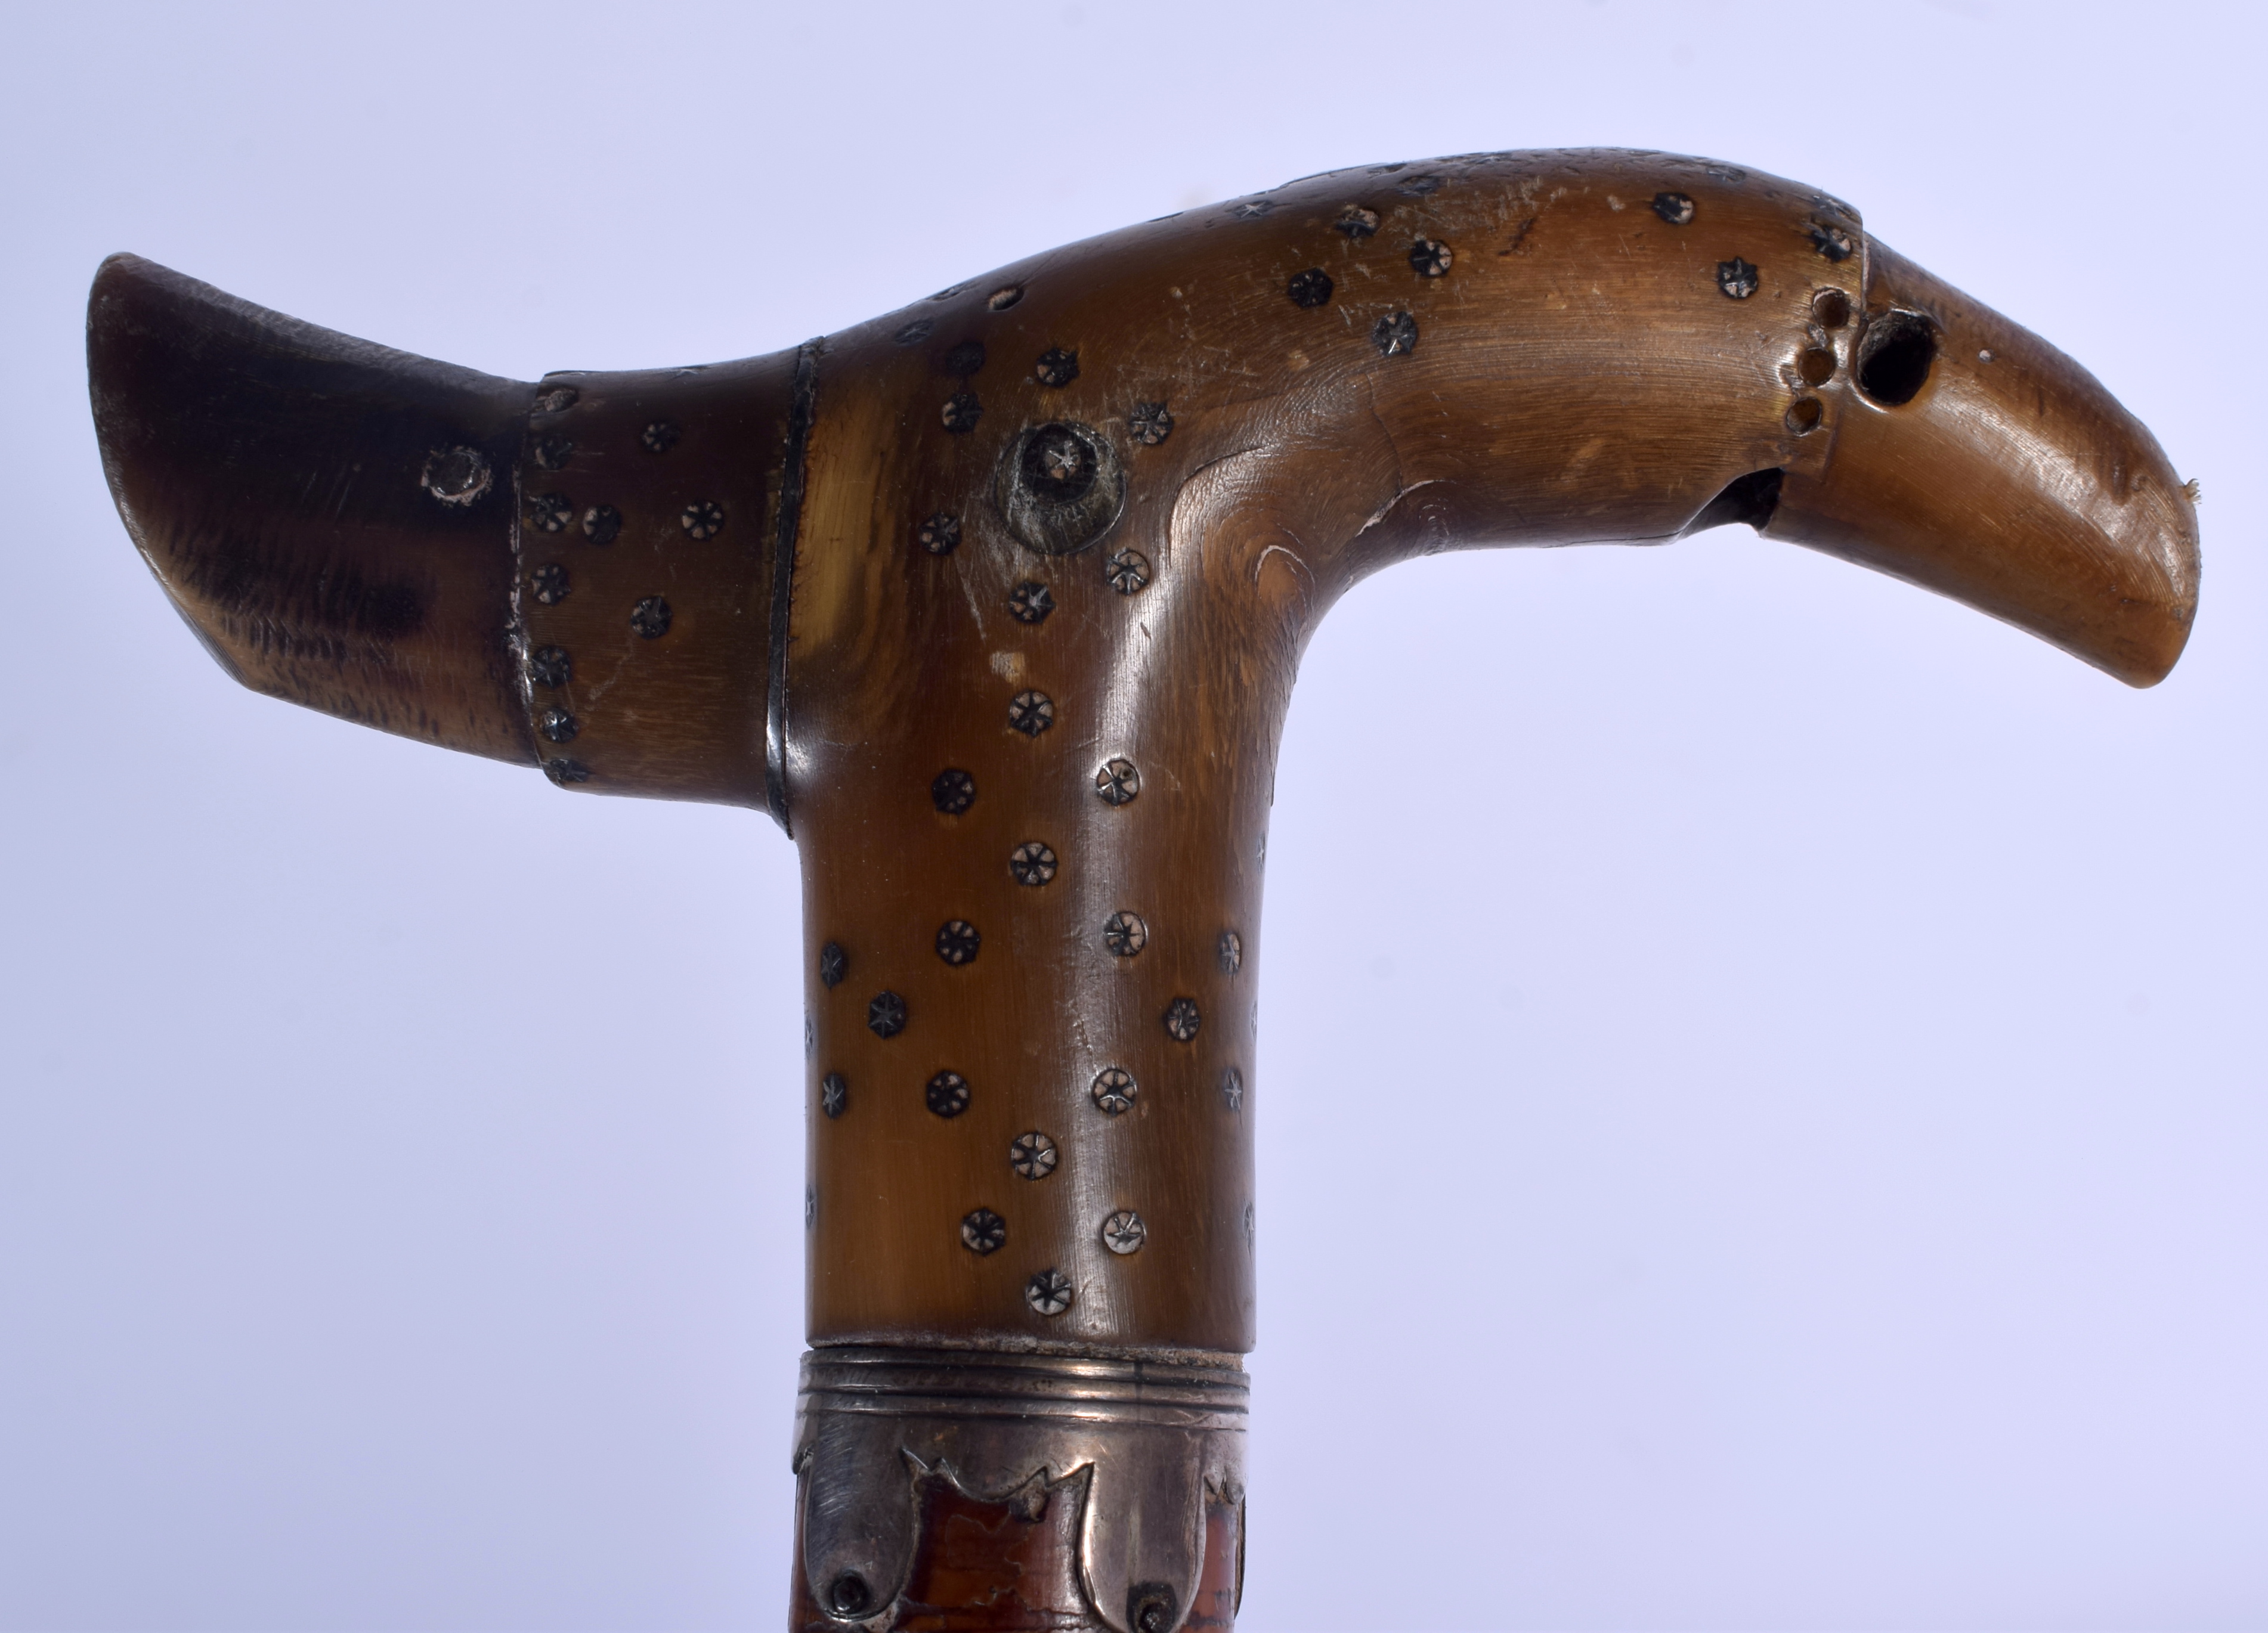 TWO 19TH CENTURY CONTINENTAL CARVED RHINOCEROS HORN HANDLED WALKING CANES with silver pique work han - Image 4 of 6